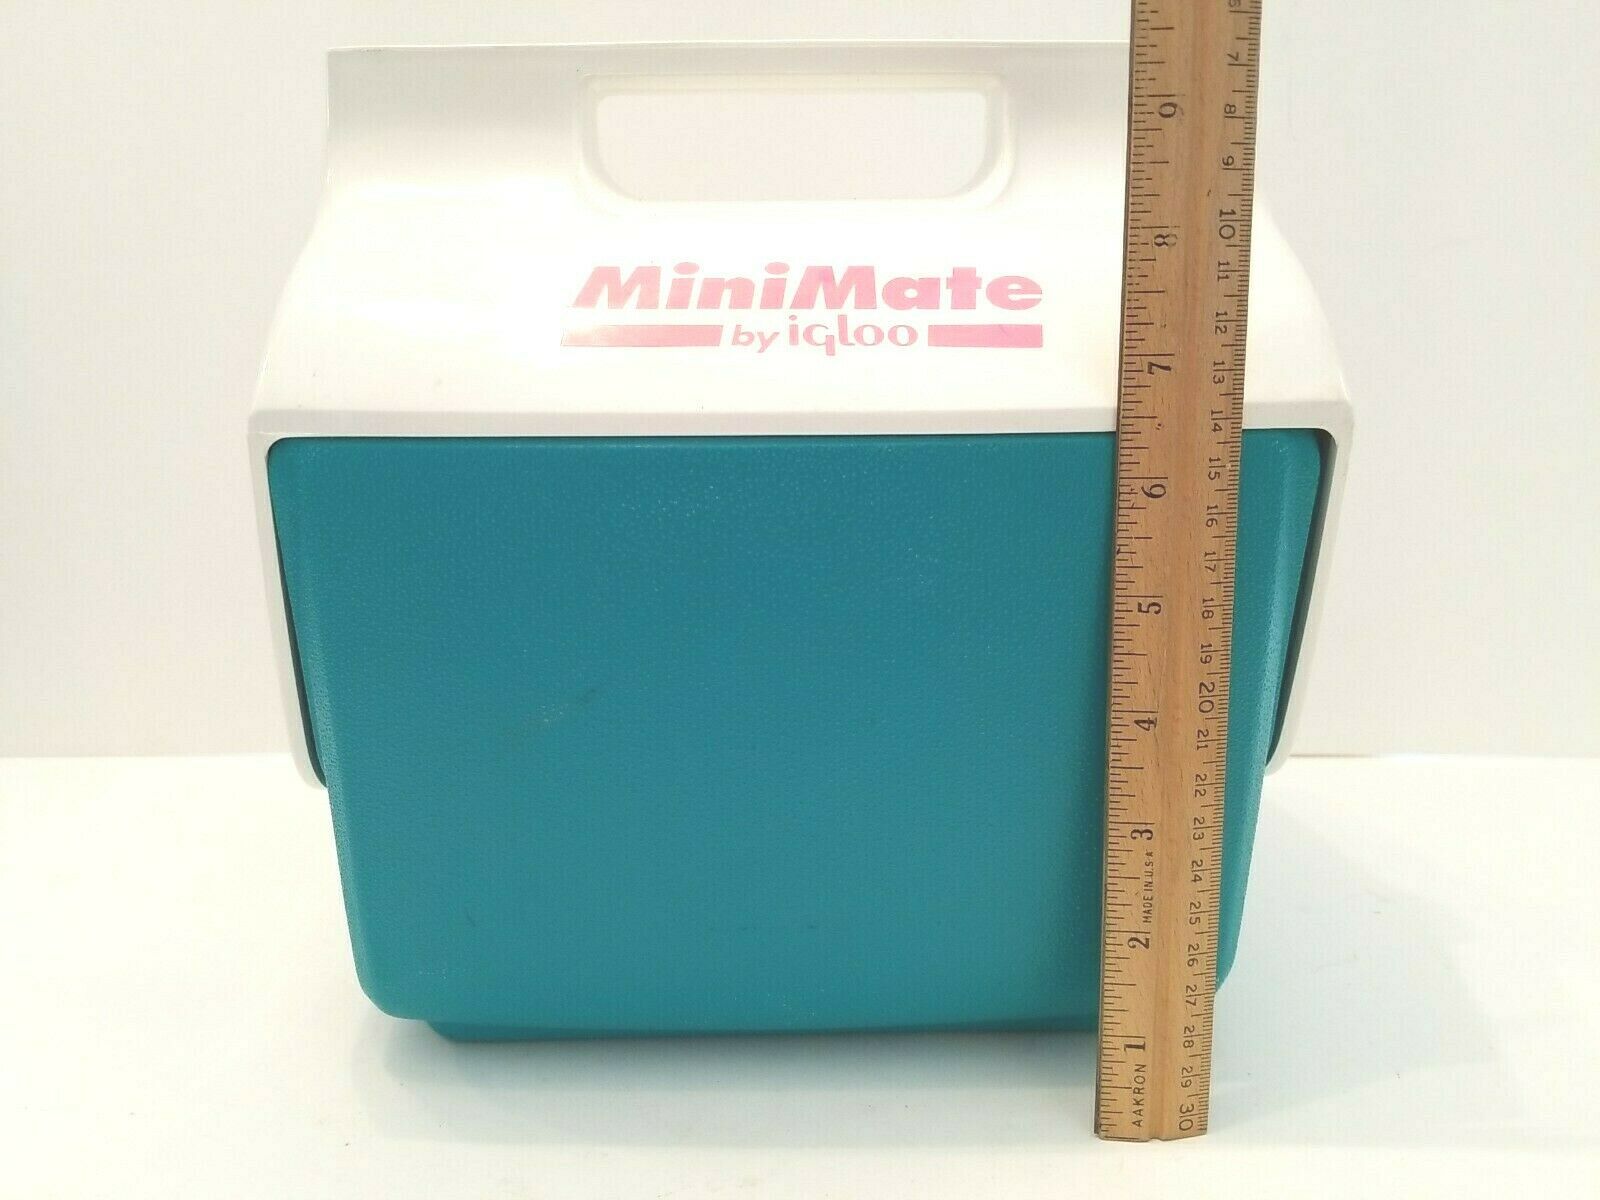 Igloo 90s Retro Collection Square Neon Lunch Box Soft Side Cooler